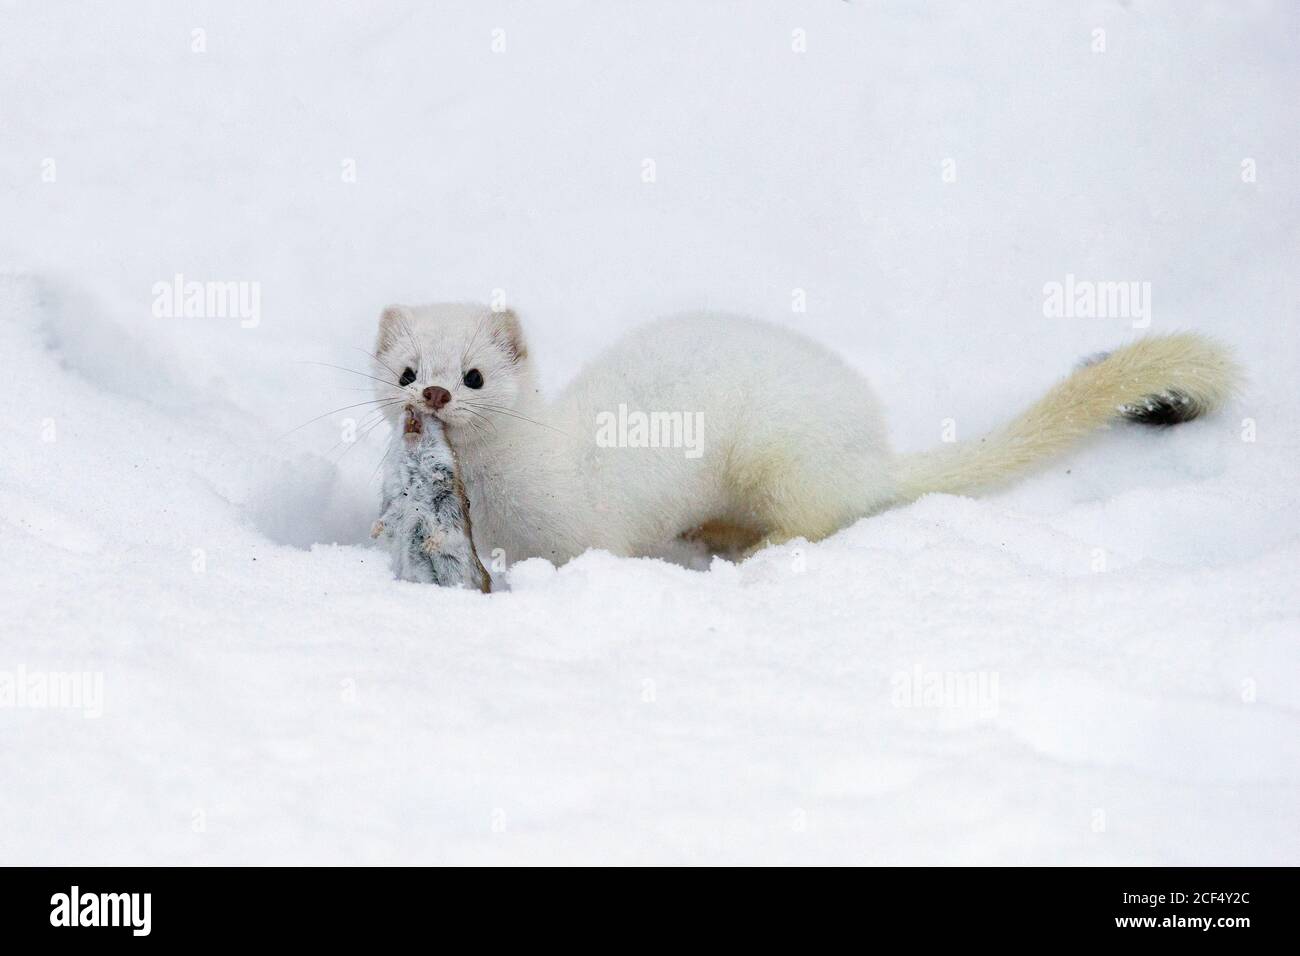 Weasel in snow Stock Photo